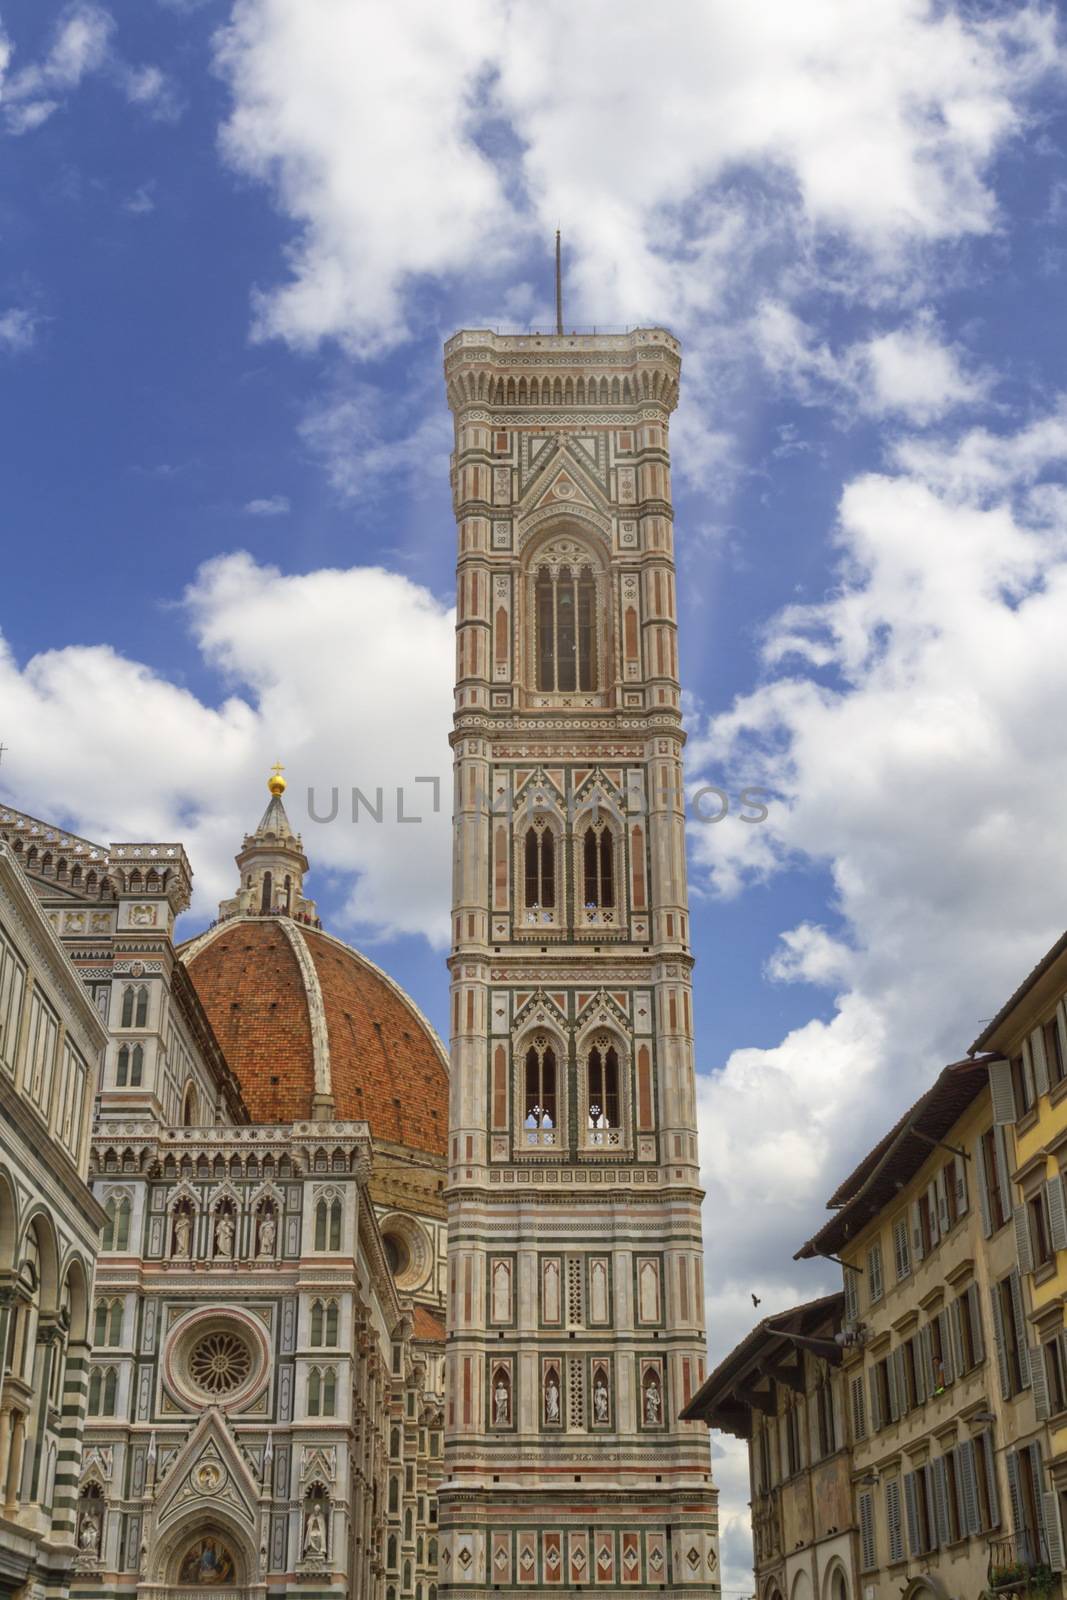 Cathedral of Santa Maria del Fiore and Giotto's Bell Tower in Florence by day, Italy